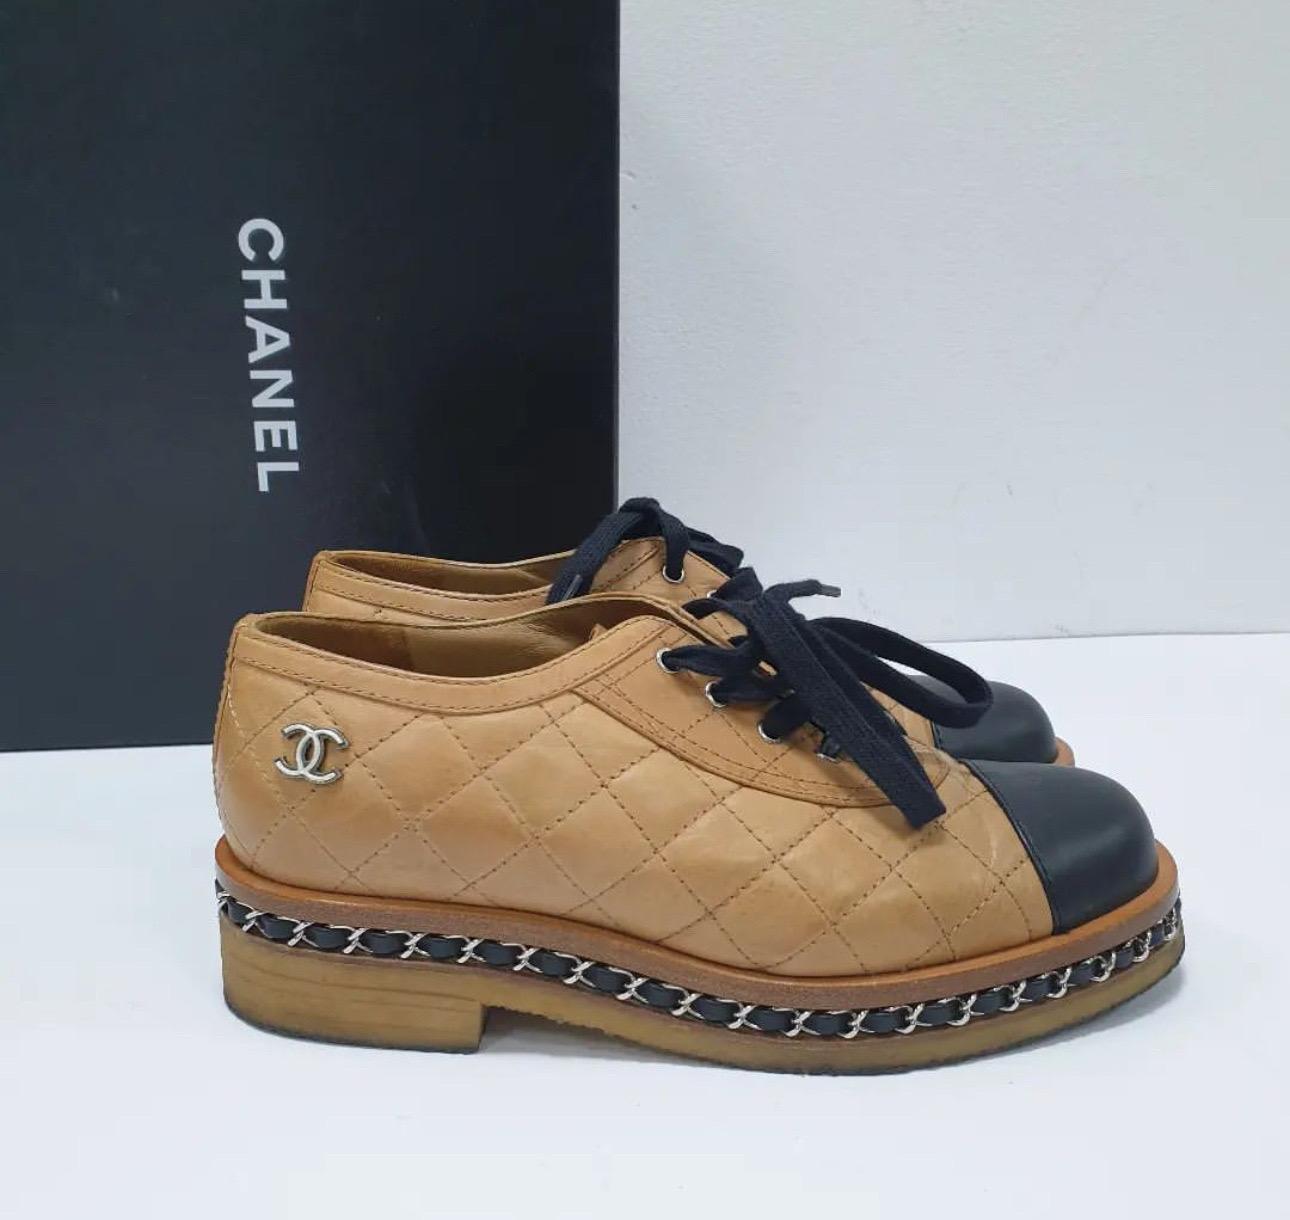 Chanel  Quilted Leather Chain Embellished Cap Toe Oxfords In Good Condition For Sale In Krakow, PL